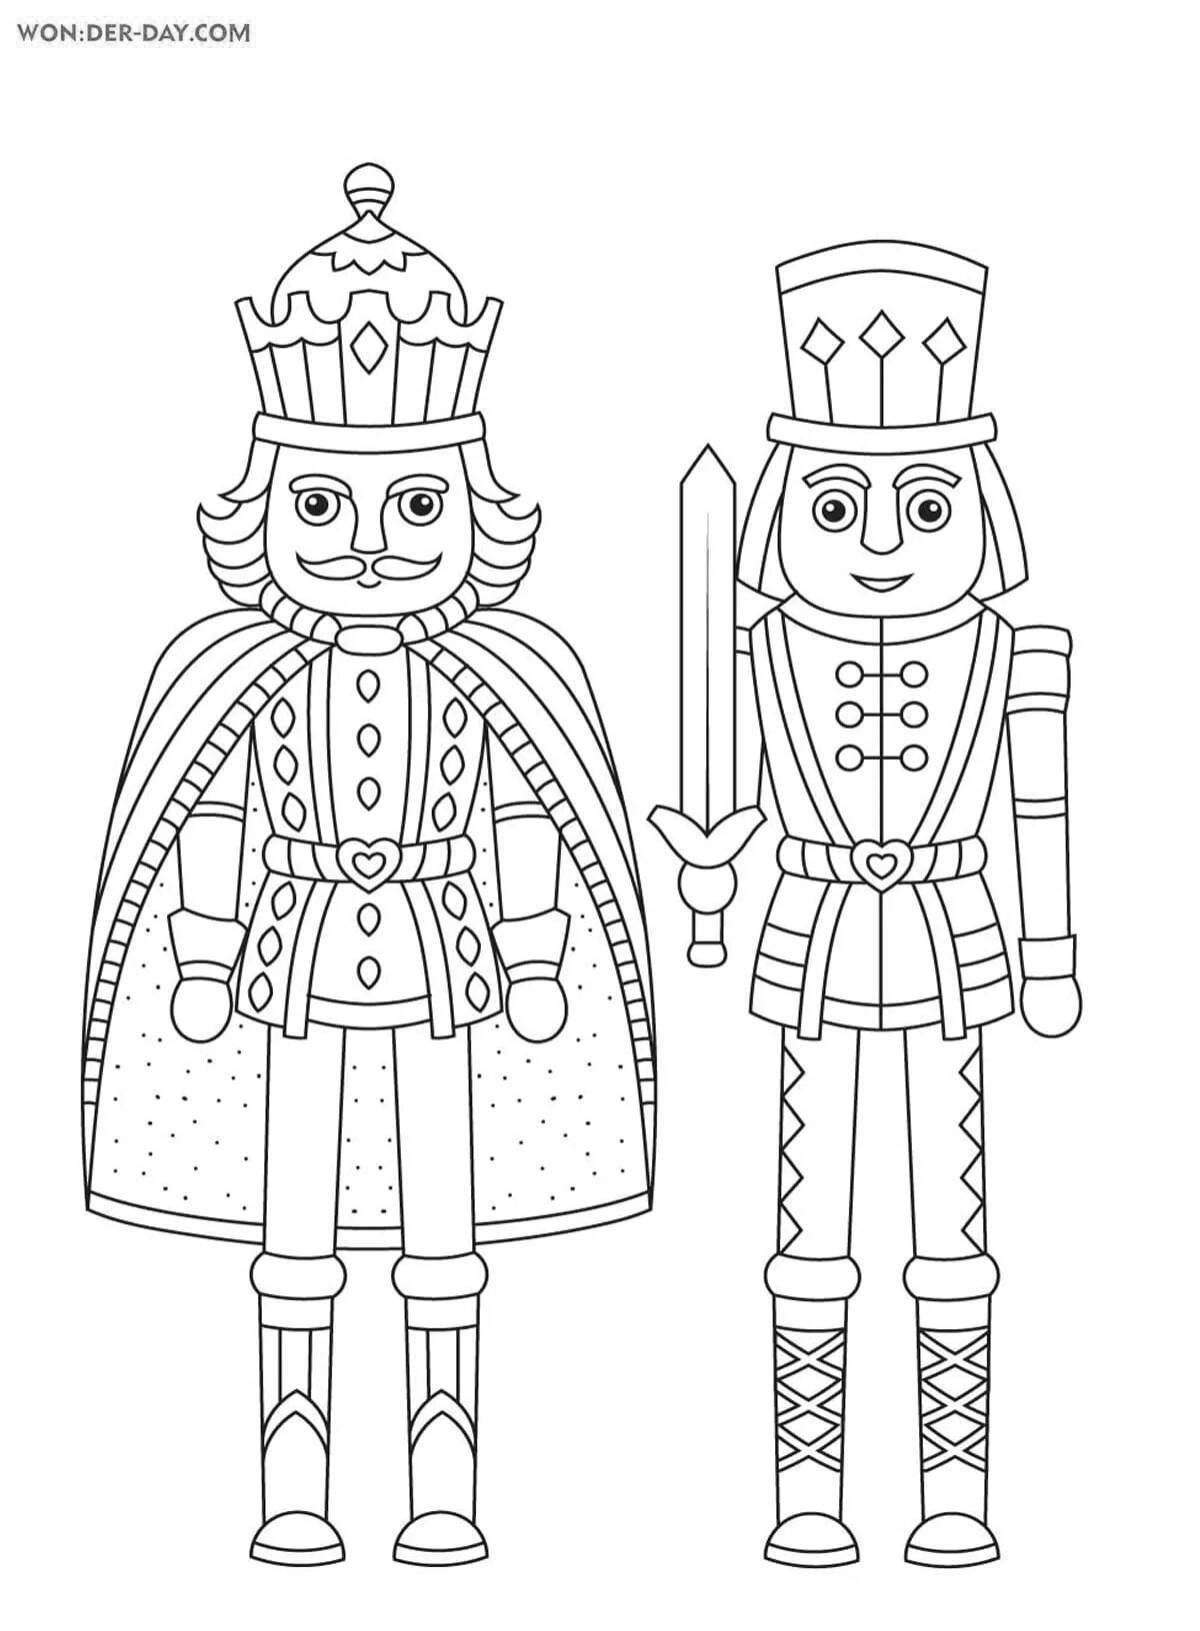 Rampant Nutcracker and Mouse King coloring book